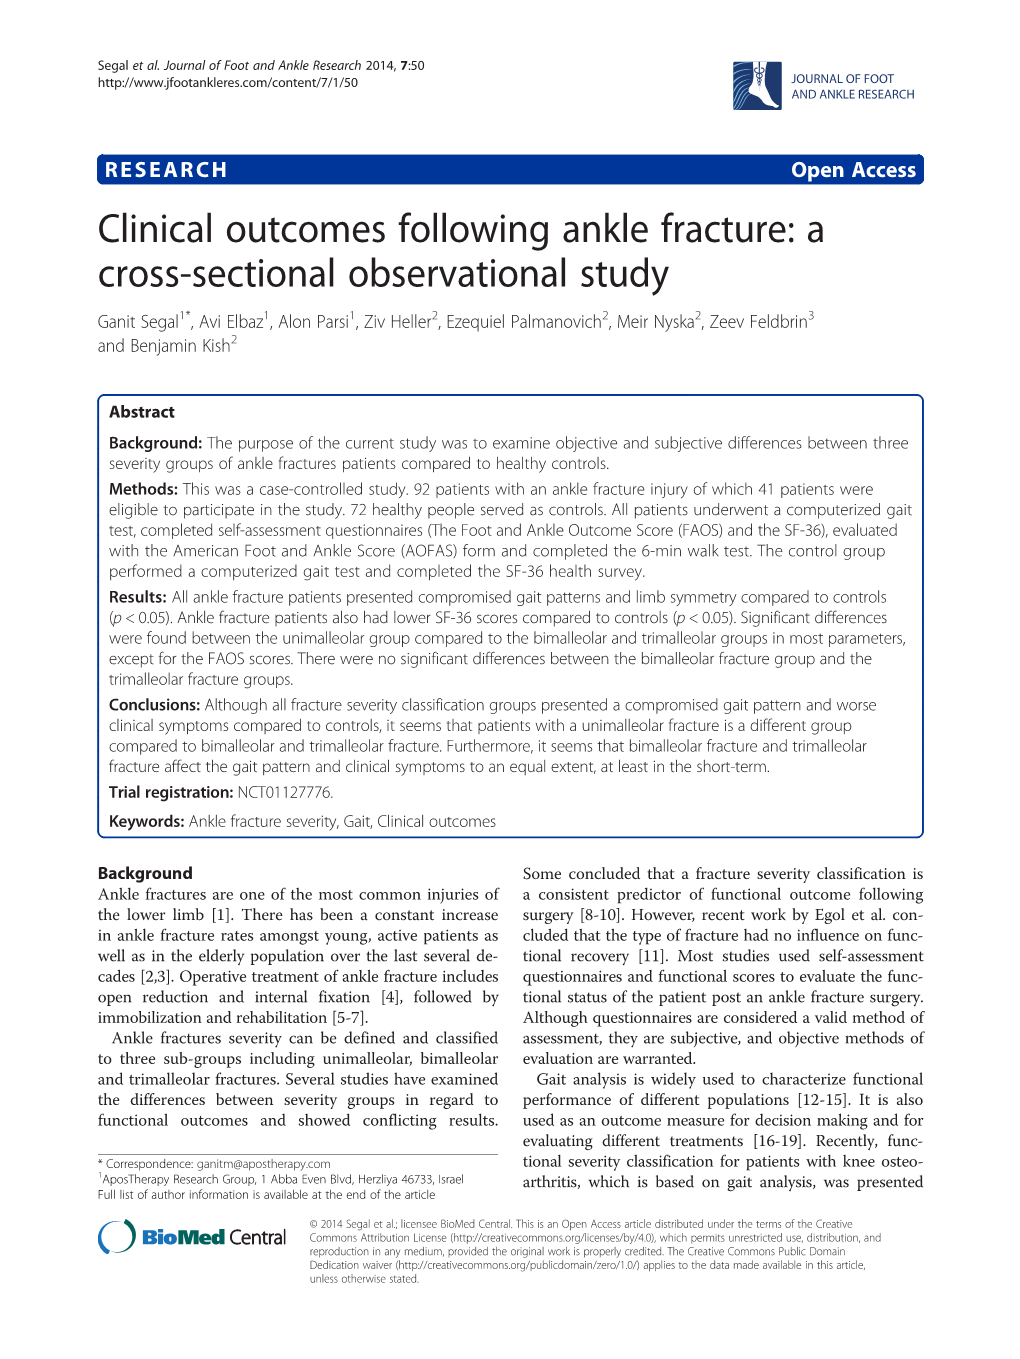 Clinical Outcomes Following Ankle Fracture: a Cross-Sectional Observational Study